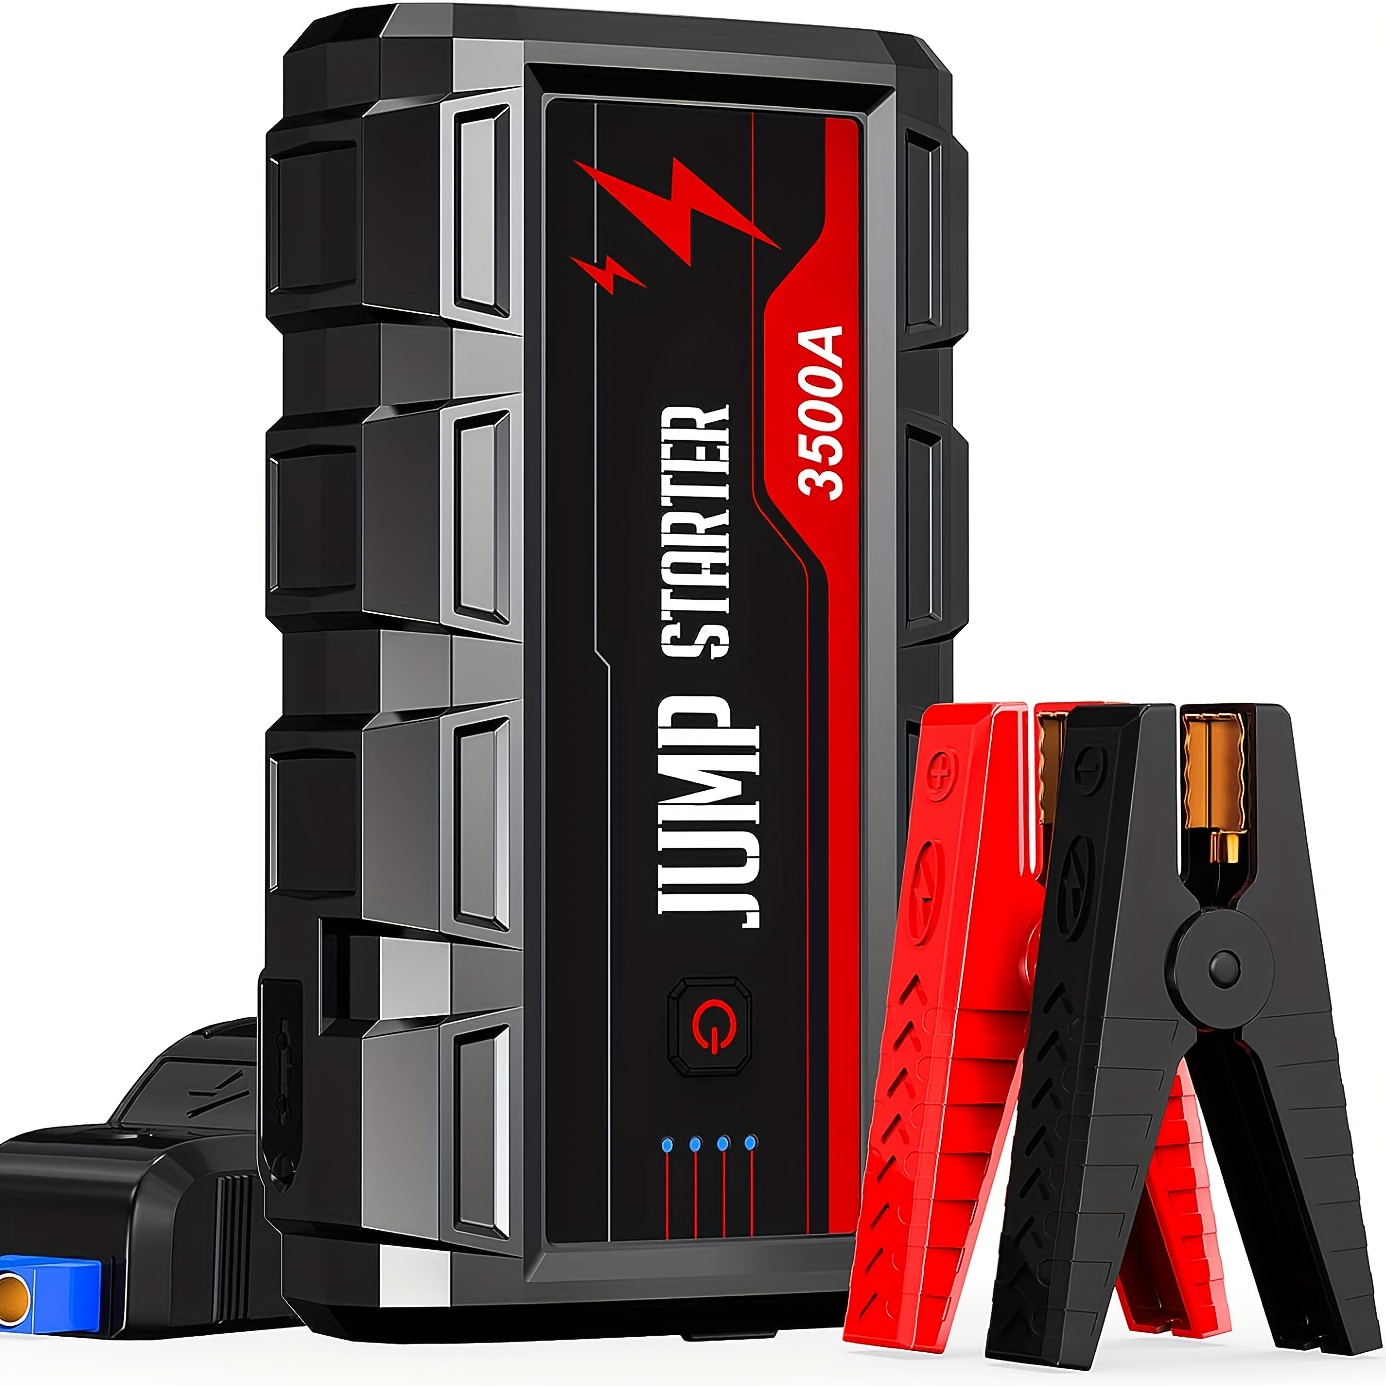 BUTURE Portable Car Jump Starter with Air Compressor, 4500A, 26800mAh  Battery Booster Pack, Fast Charger, Emergency Light